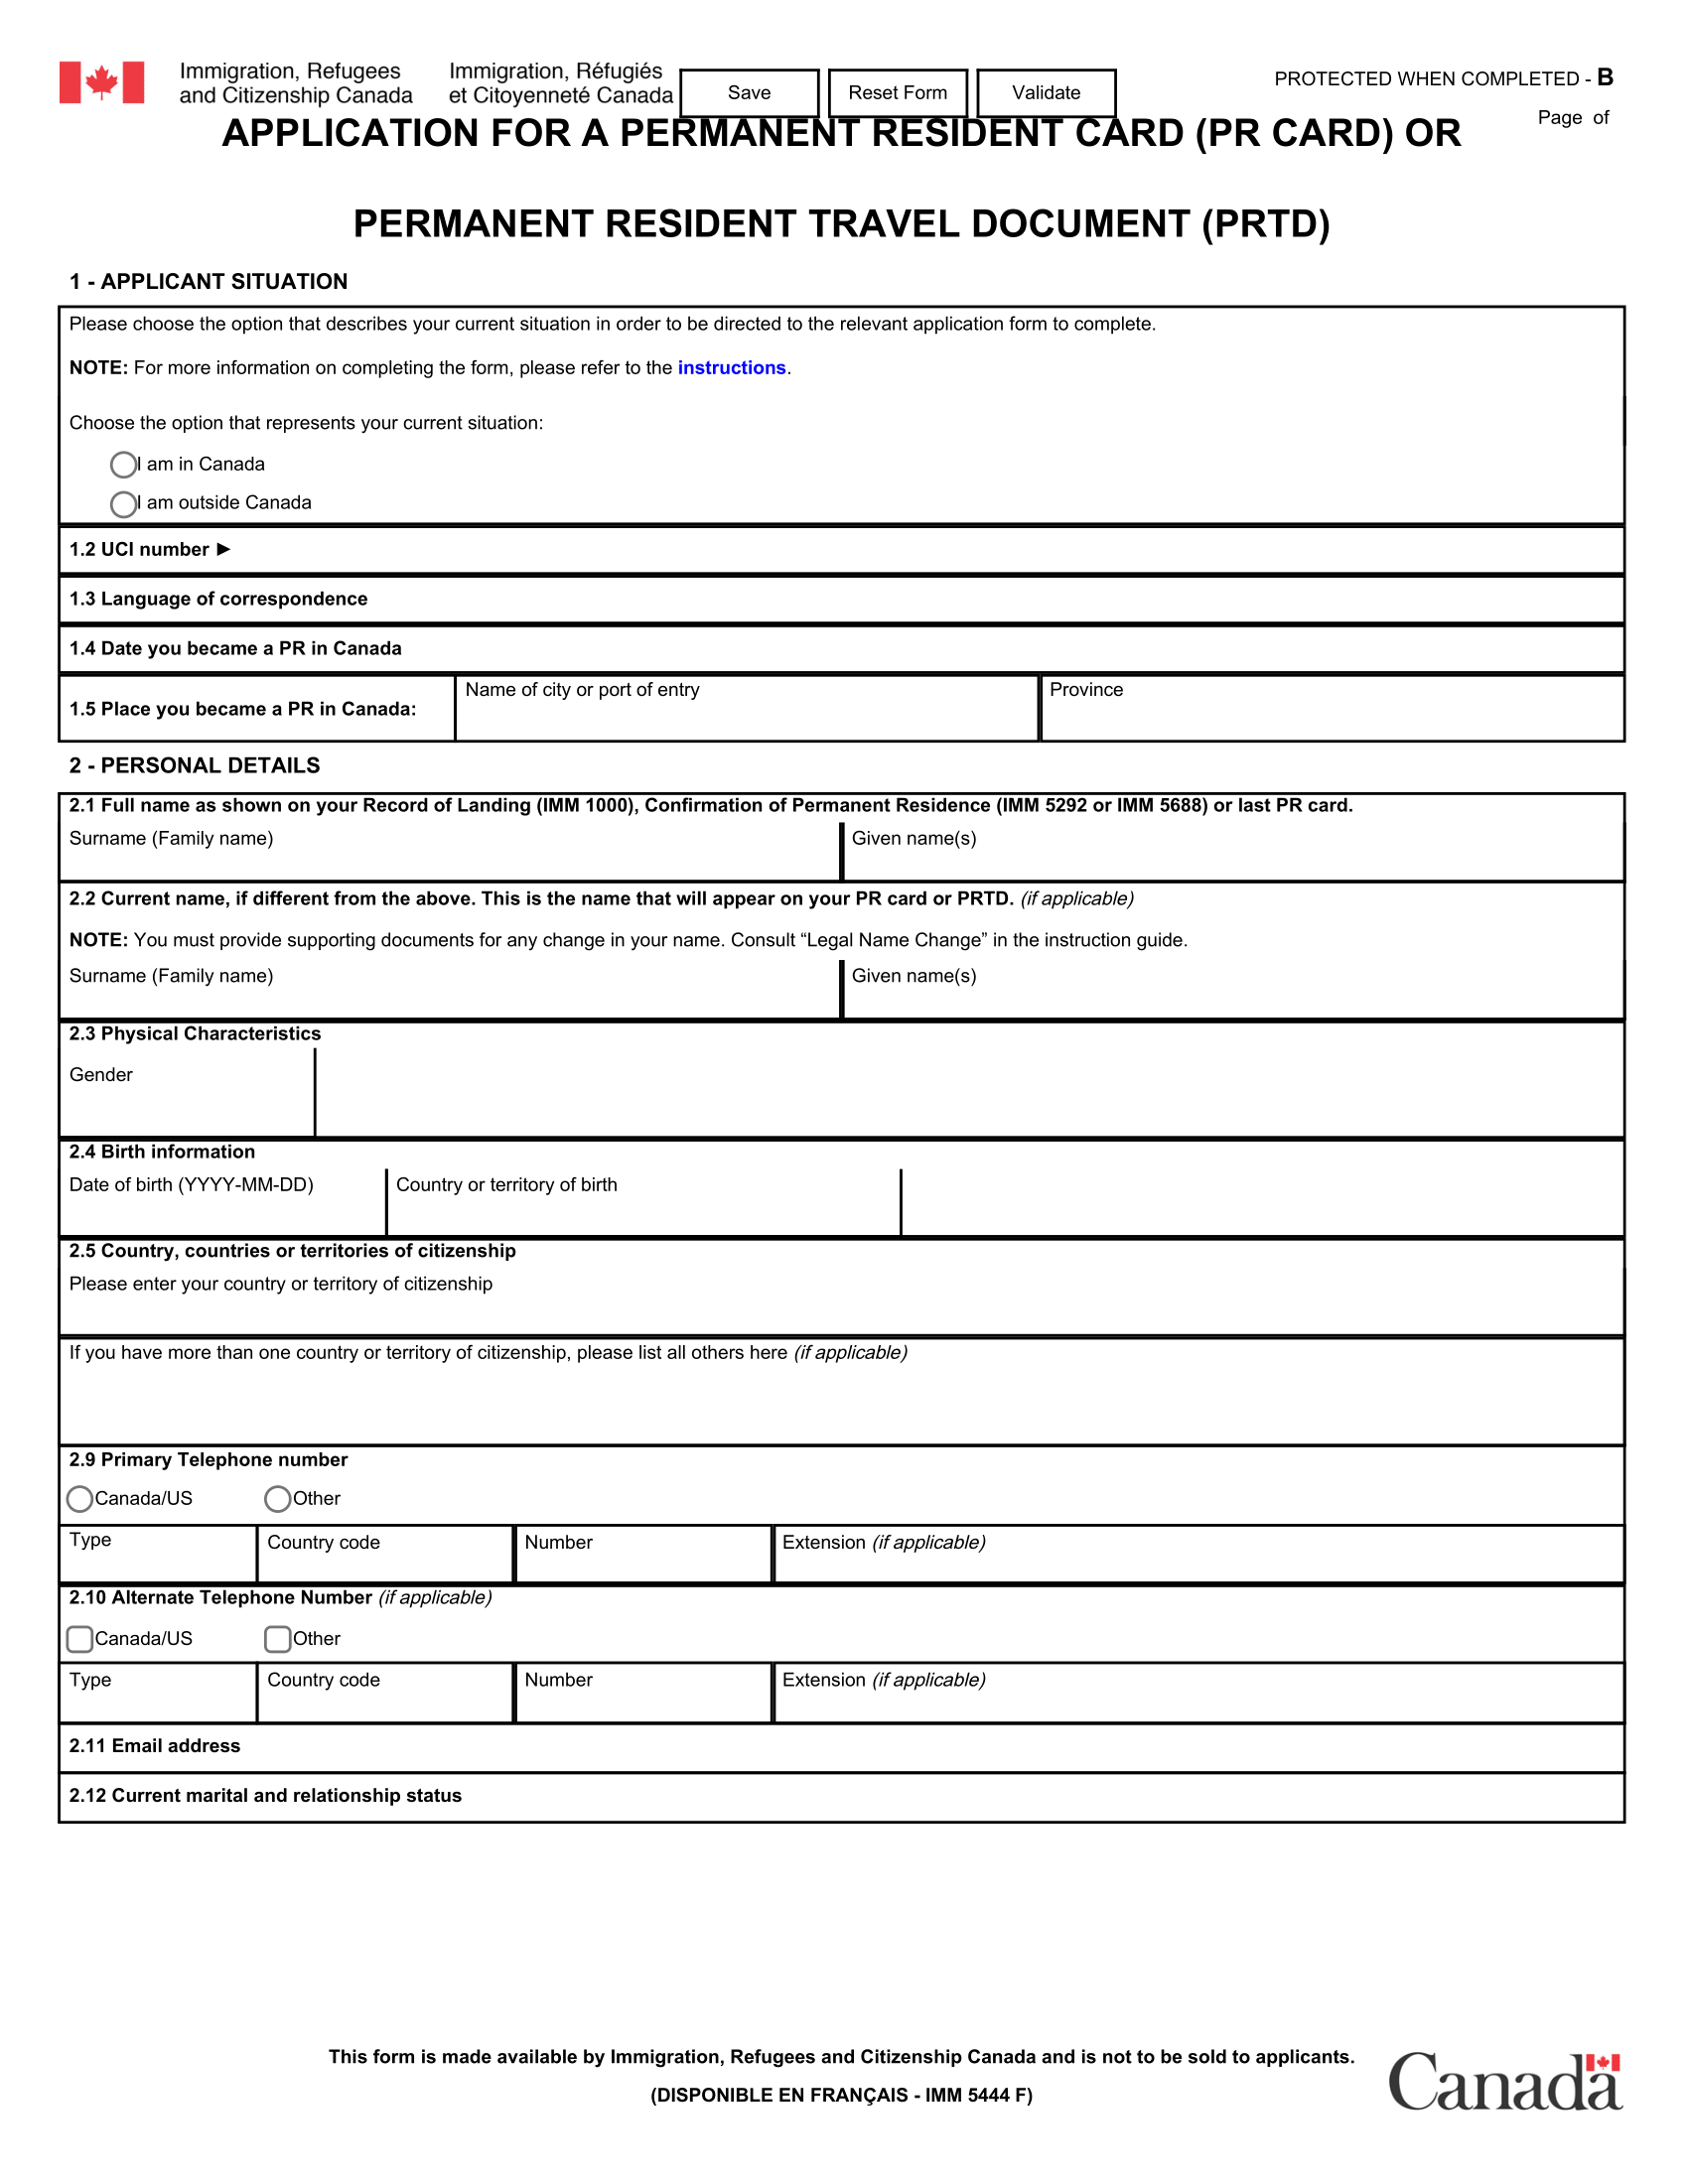 travel document application form for permanent resident